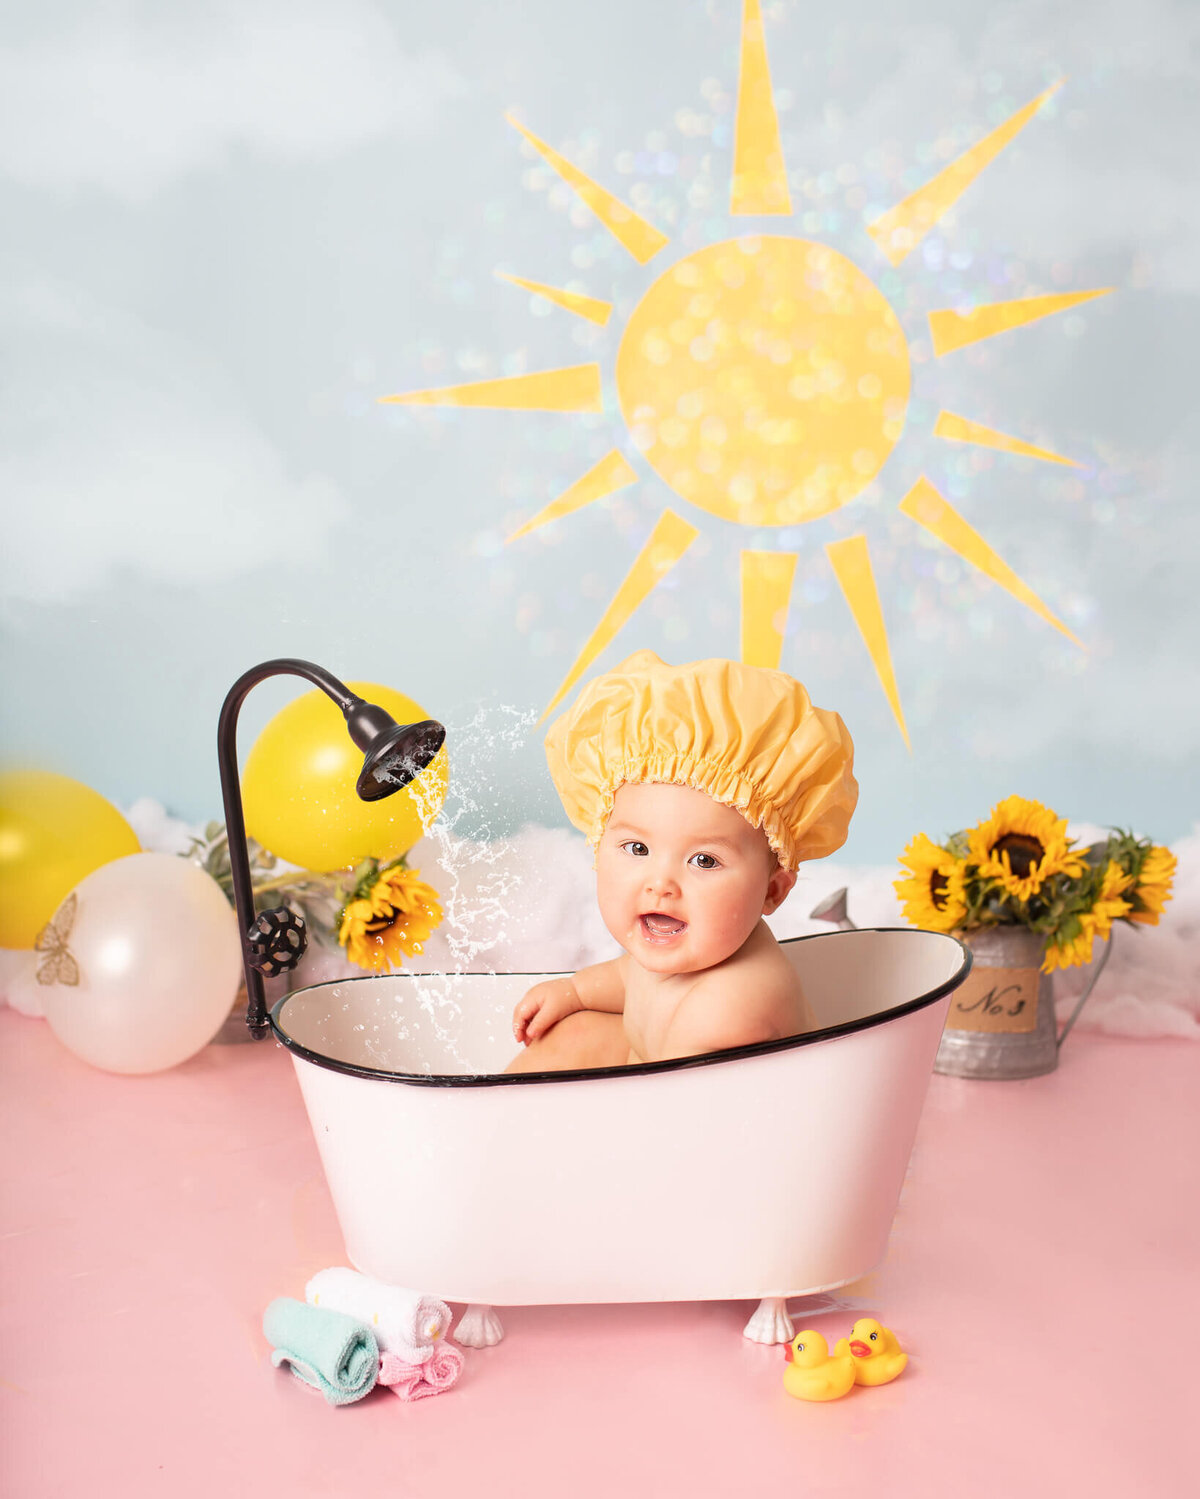 Cake smash and splash photoshoot in LA, baby wearing a shower cap and laughing - By Los Angeles Newborn Photographer